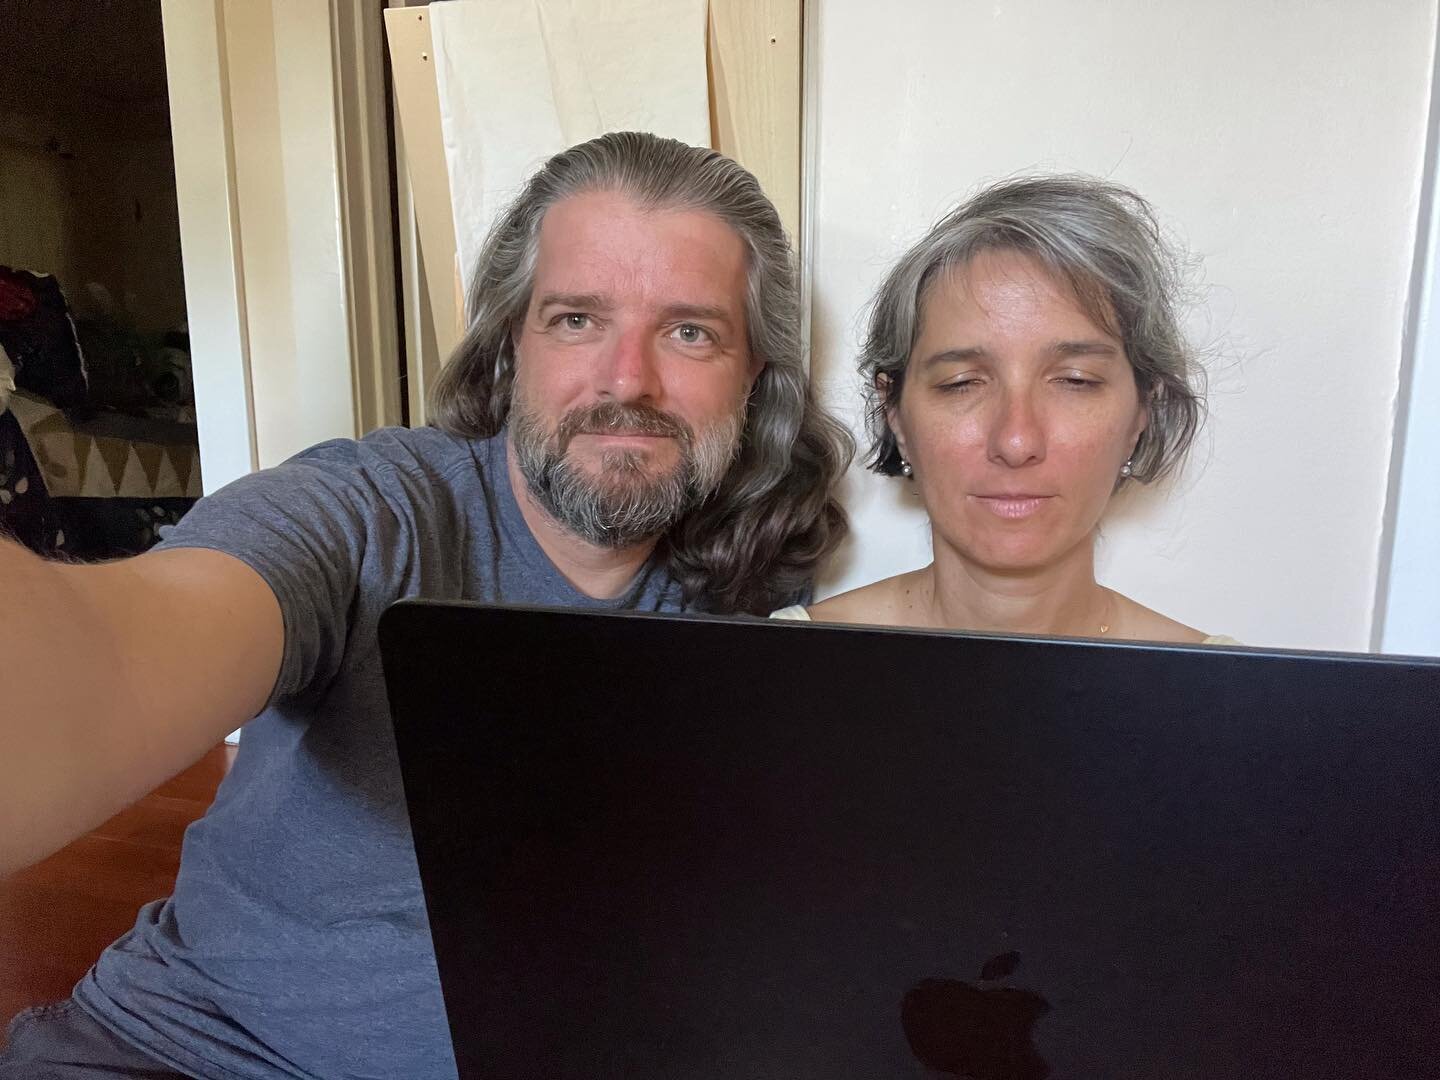 David and I were apprehensive when we submitted our initial Fish in the Desert manuscript to an editor with two decades of experience at Scholastic. As first-time children's book writers, we had no idea how it would be received and were anxious about